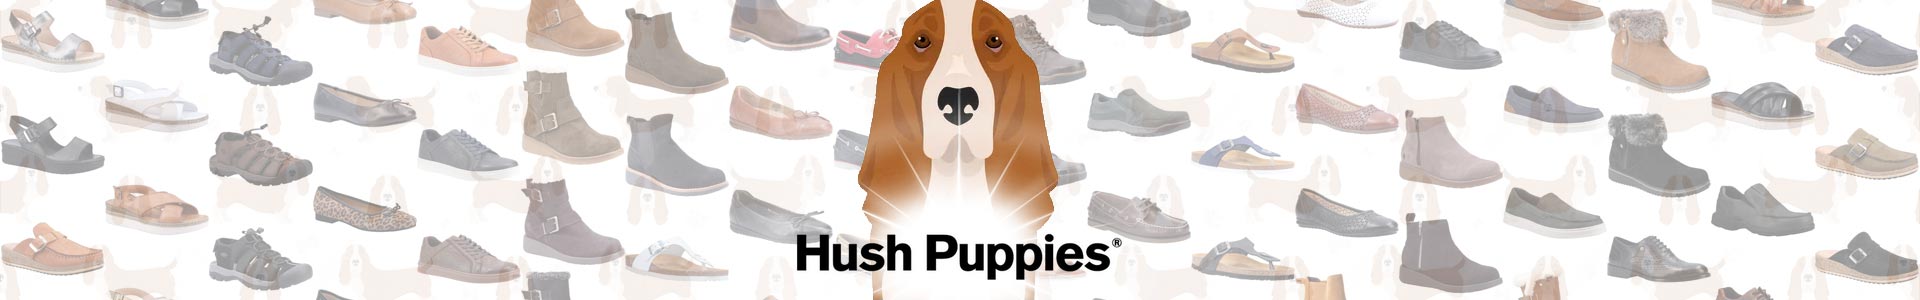 Hush Puppies products at low prices | DEICHMANN